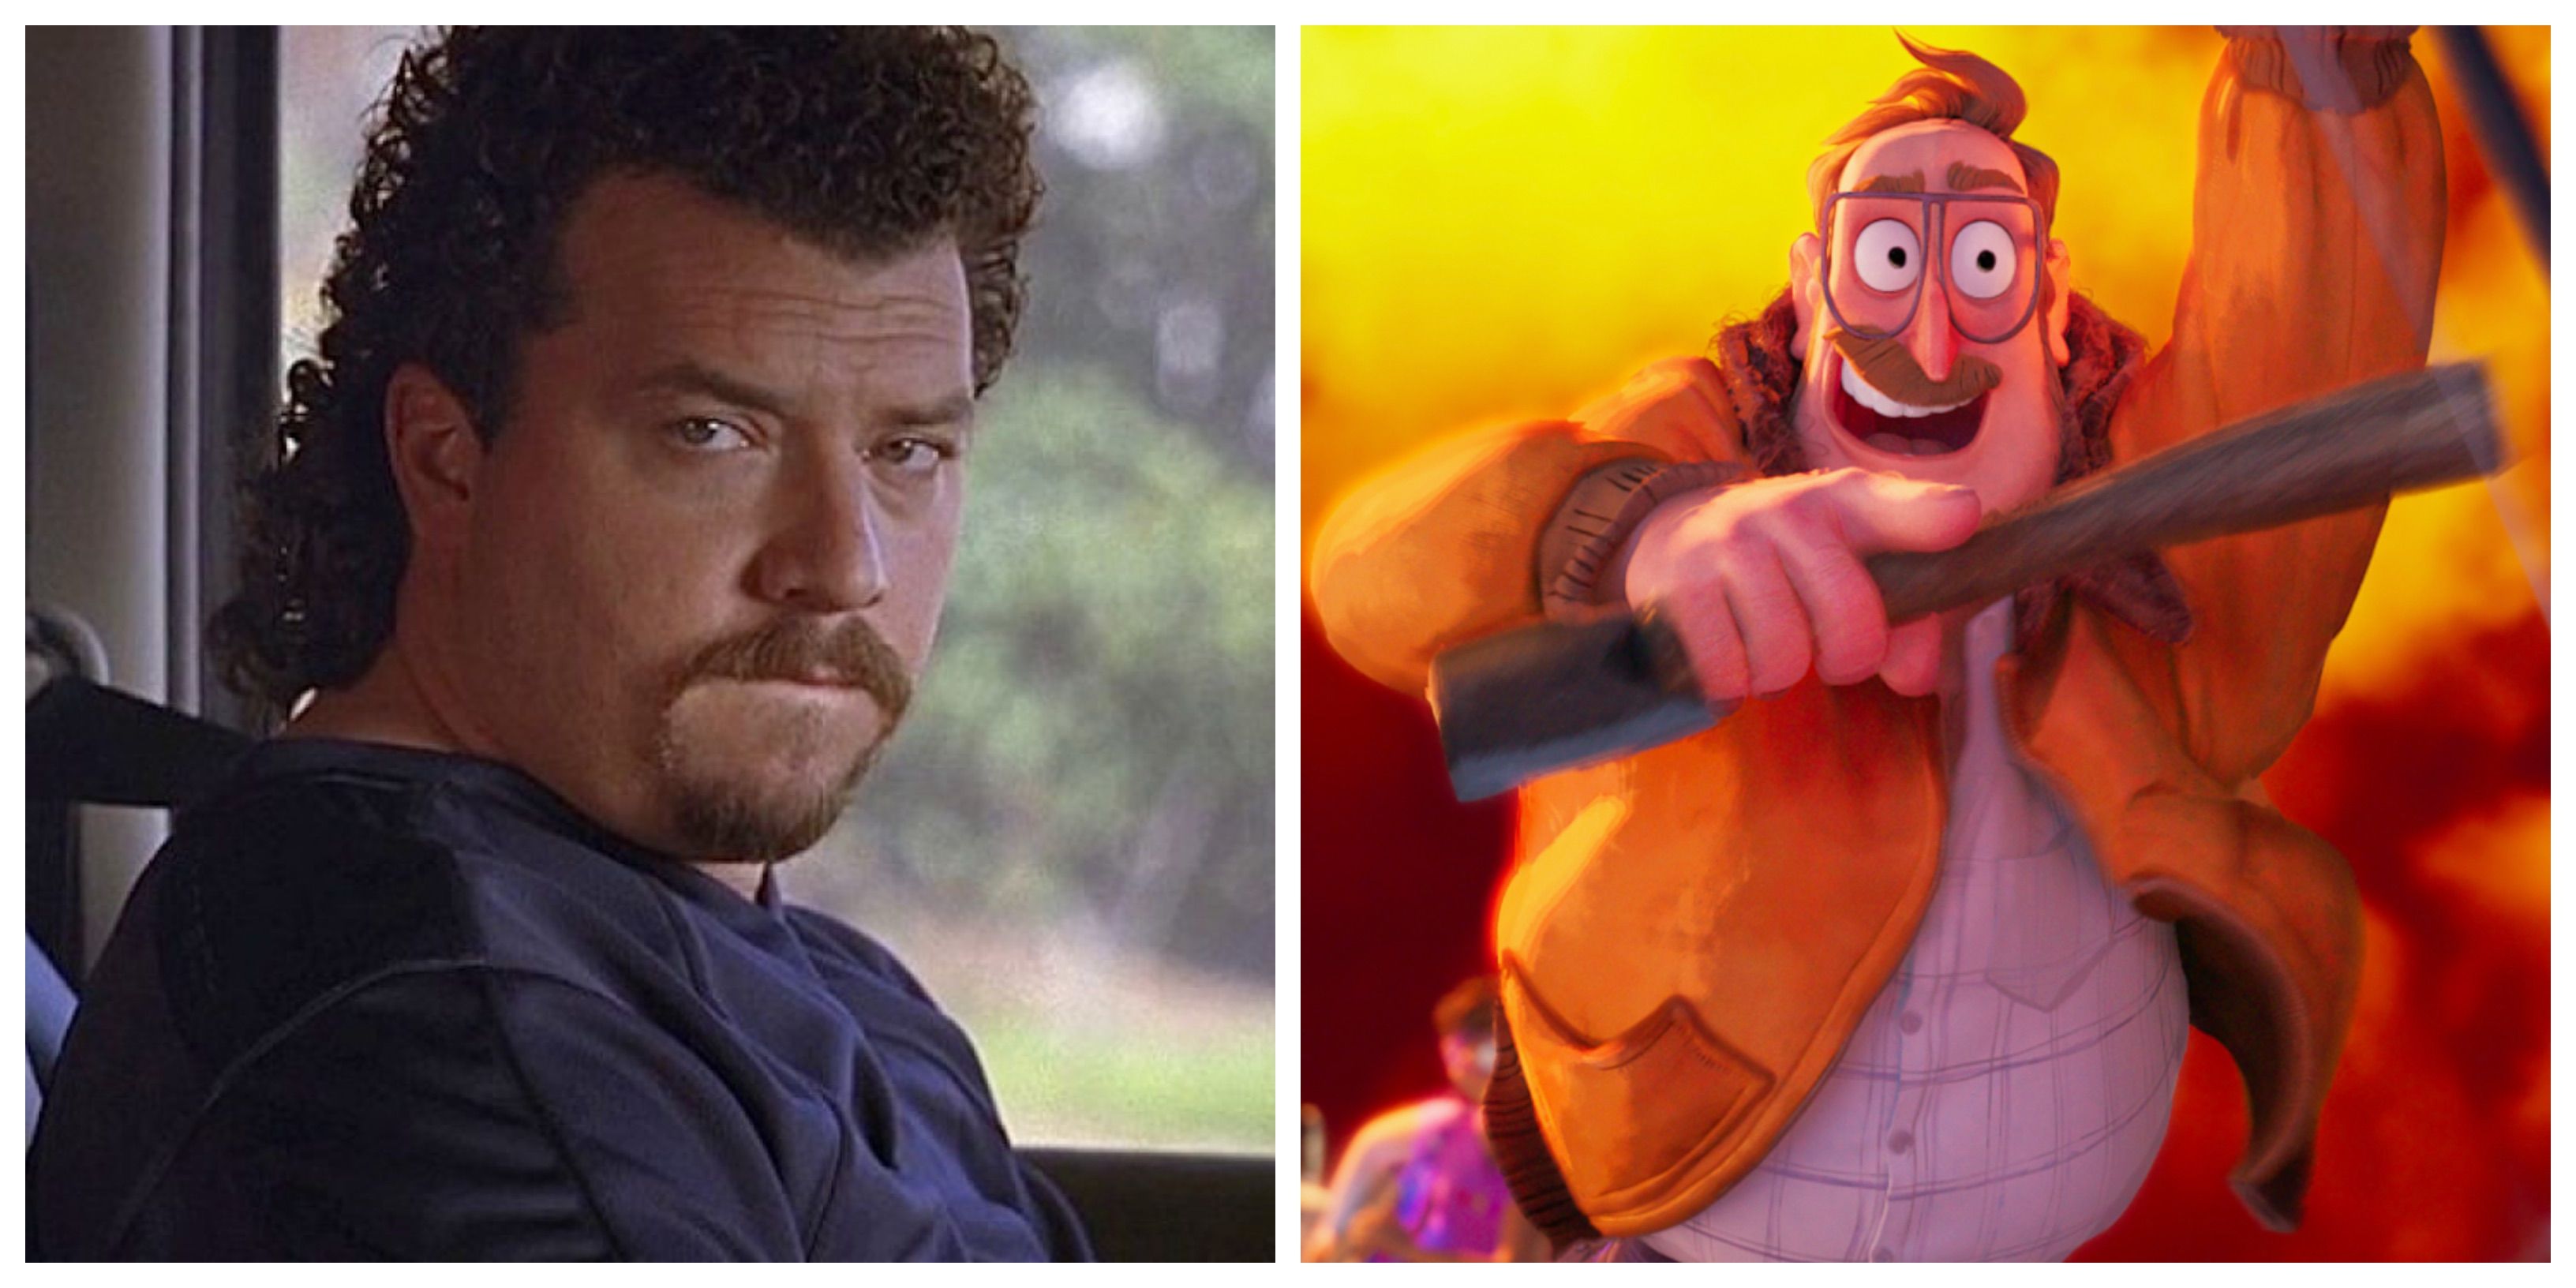 Danny McBride as Rick Mitchell in The Mitchells vs. the Machines on Netflix